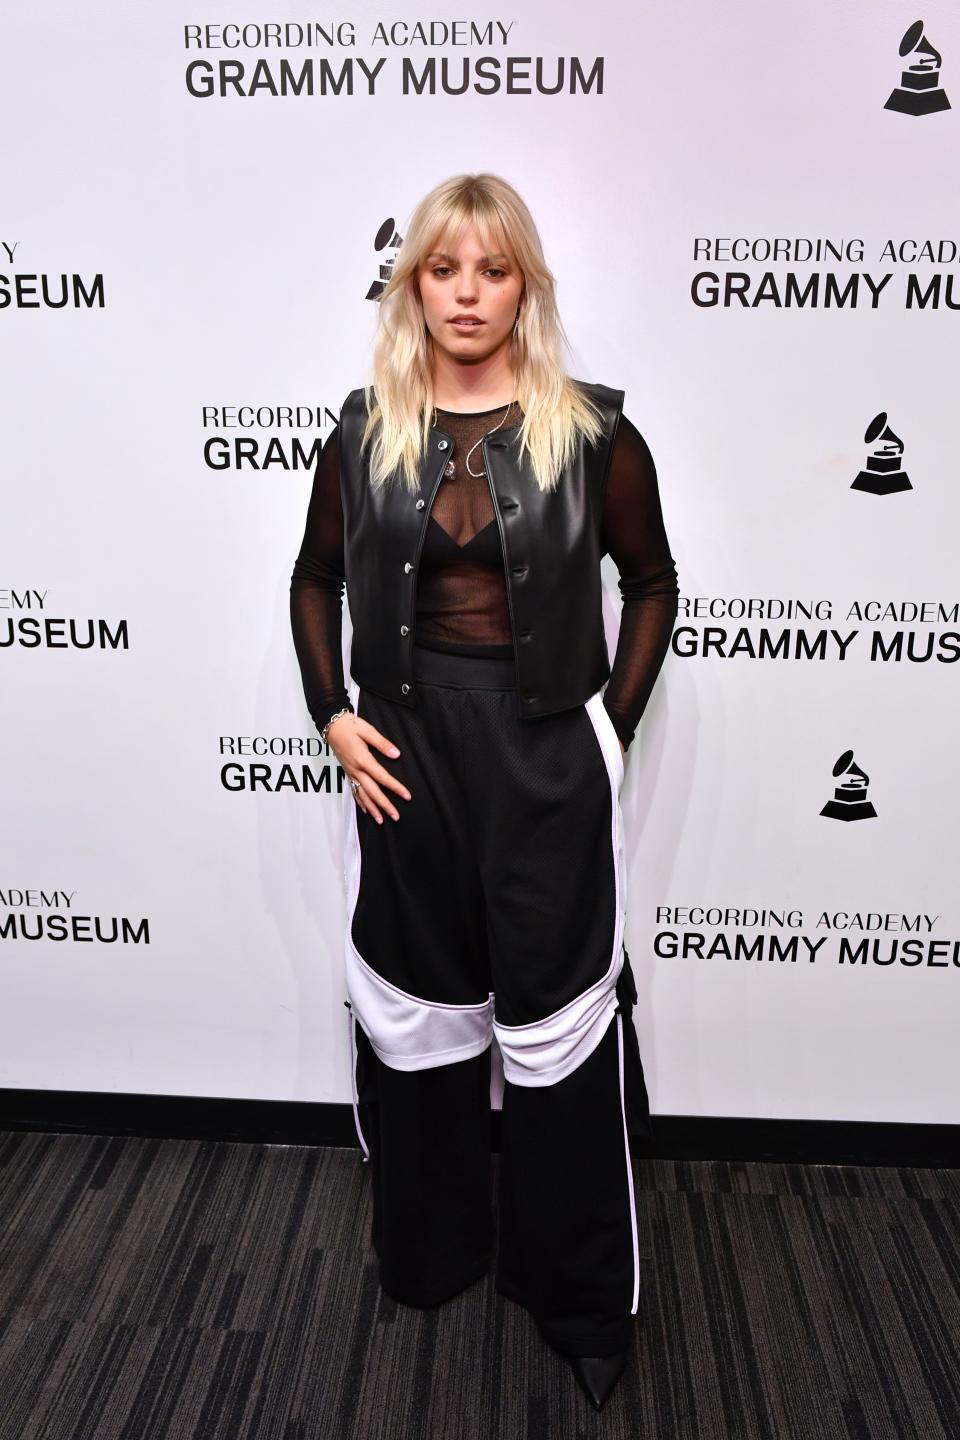 LOS ANGELES, CALIFORNIA - AUGUST 16: Reneé Rapp attends Spotlight: Reneé Rapp at The GRAMMY Museum on August 16, 2023 in Los Angeles, California. (Photo by Sarah Morris/Getty Images for The Recording Academy) ORG XMIT: 776011524 ORIG FILE ID: 1620205164